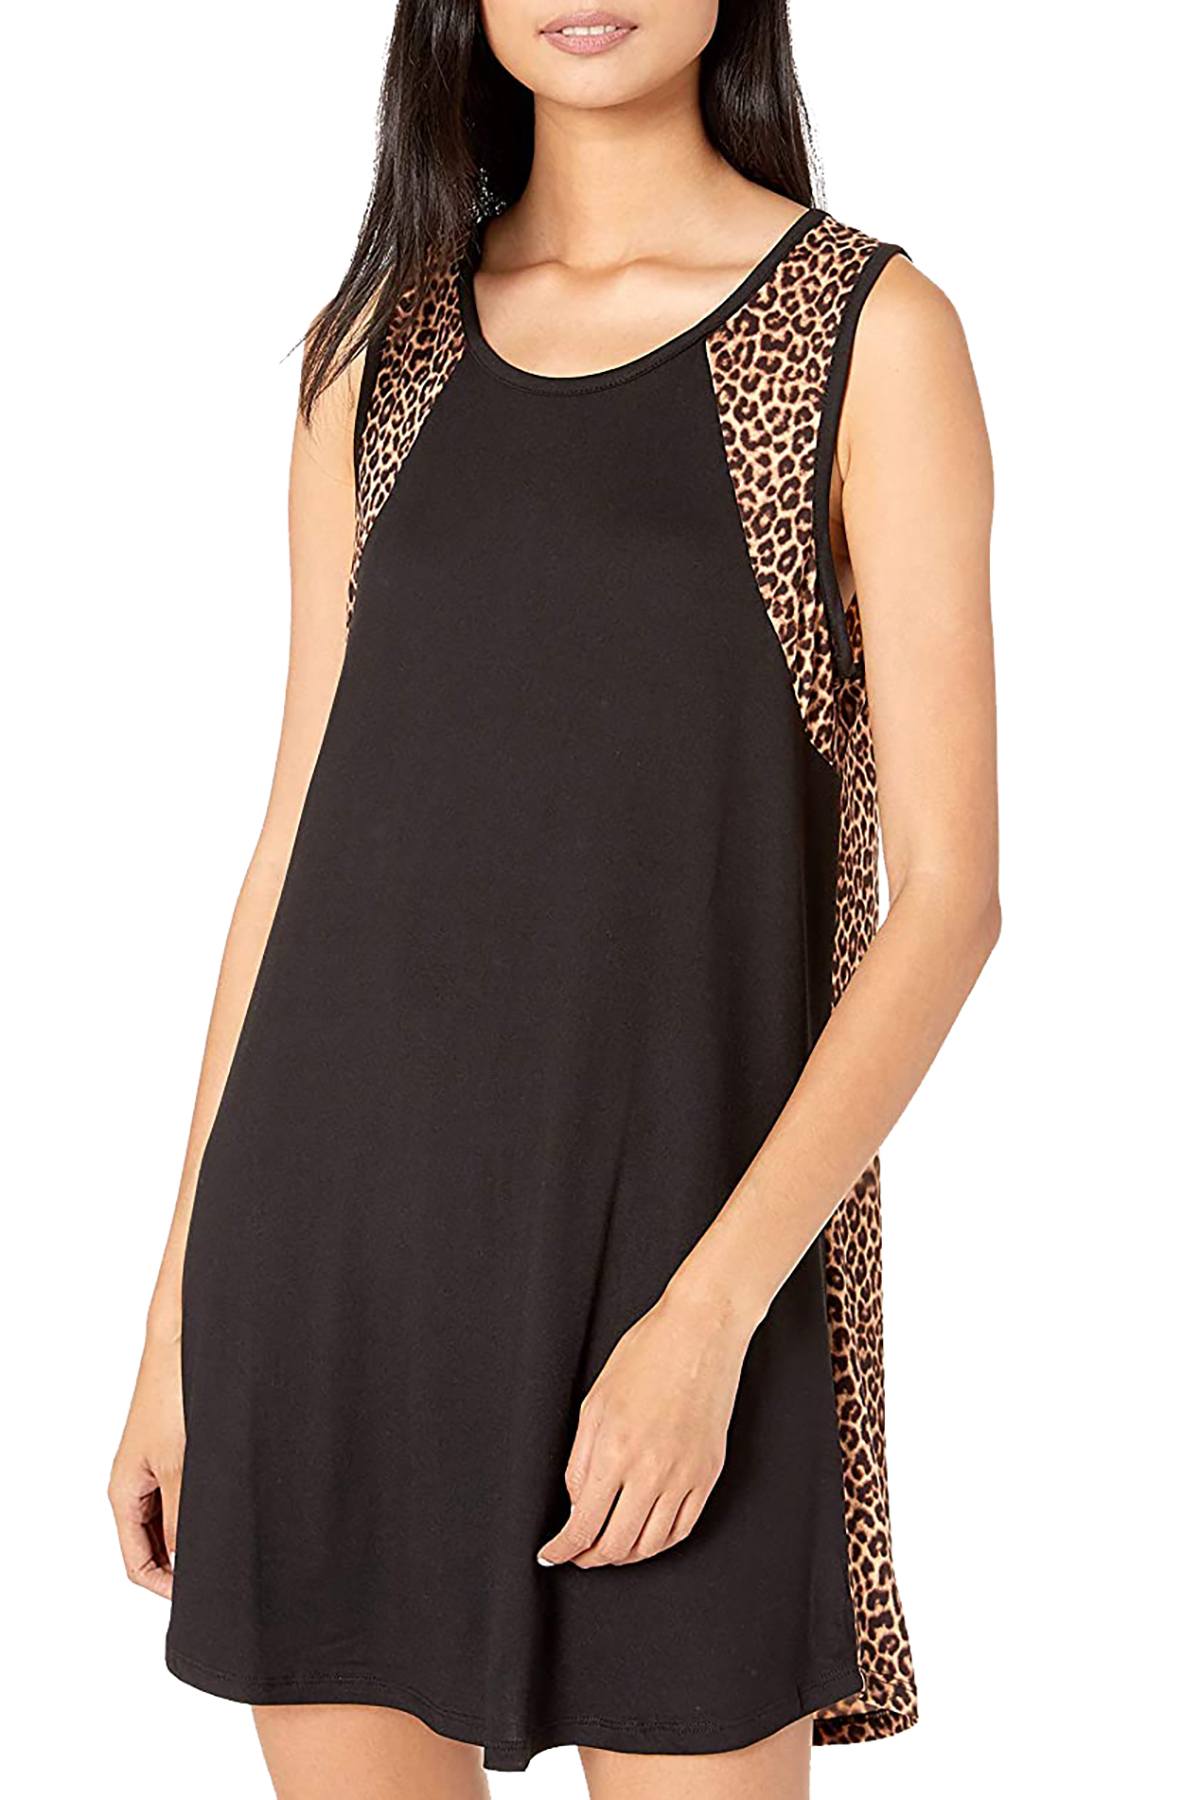 Flora By Flora Nikrooz Tanya Knit Chemise in Leopard/Black